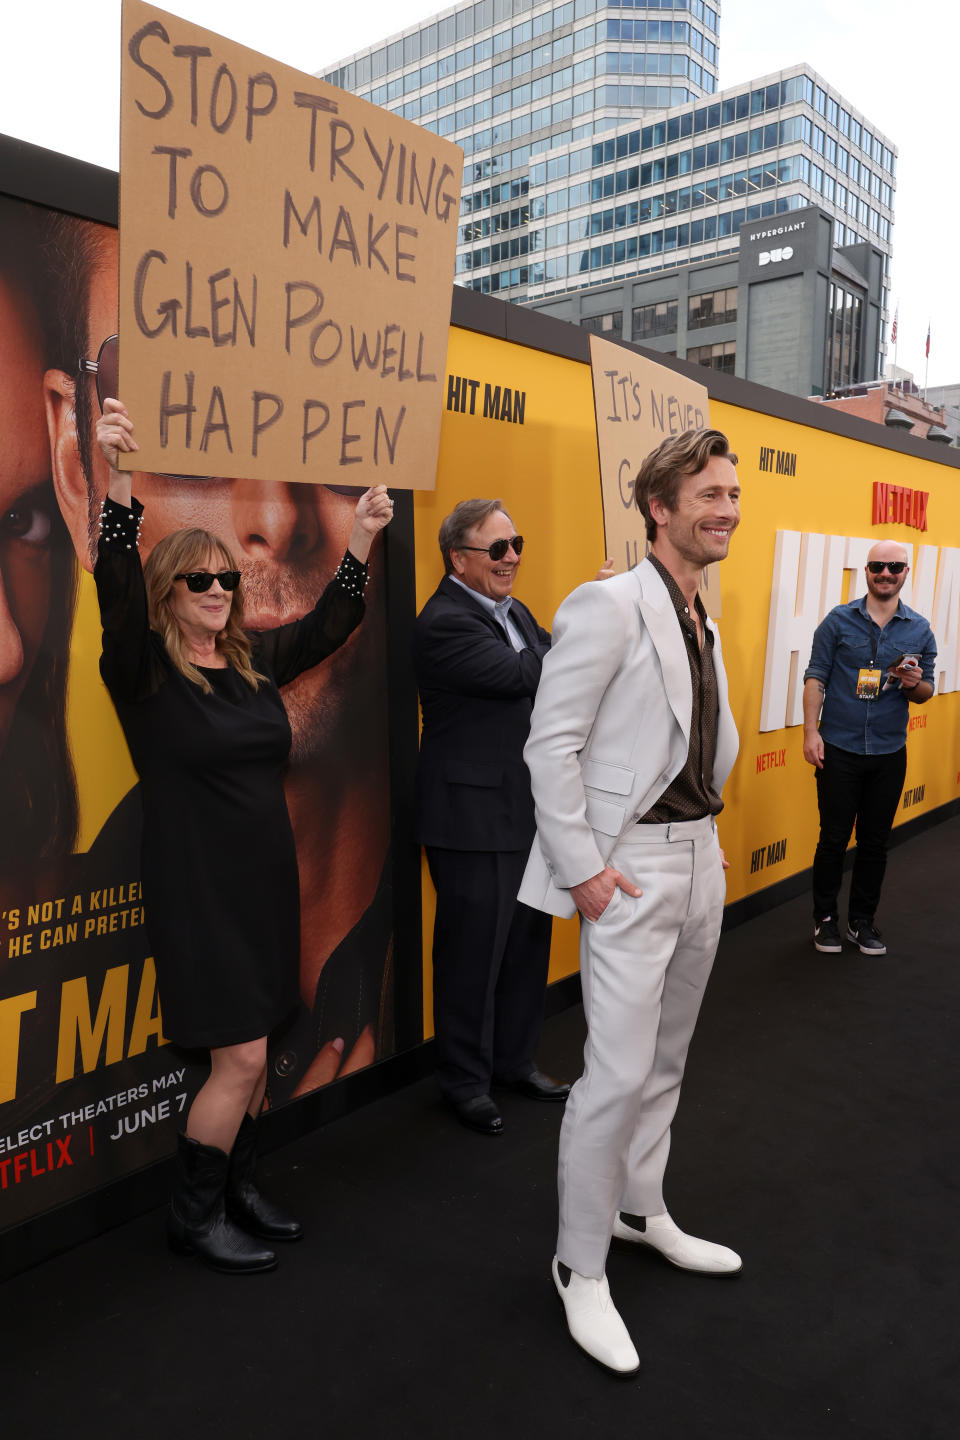 Glen Powell smirking in a light suit, standing before a poster with people holding signs, one reading "Stop trying to make Glen Powell happen."